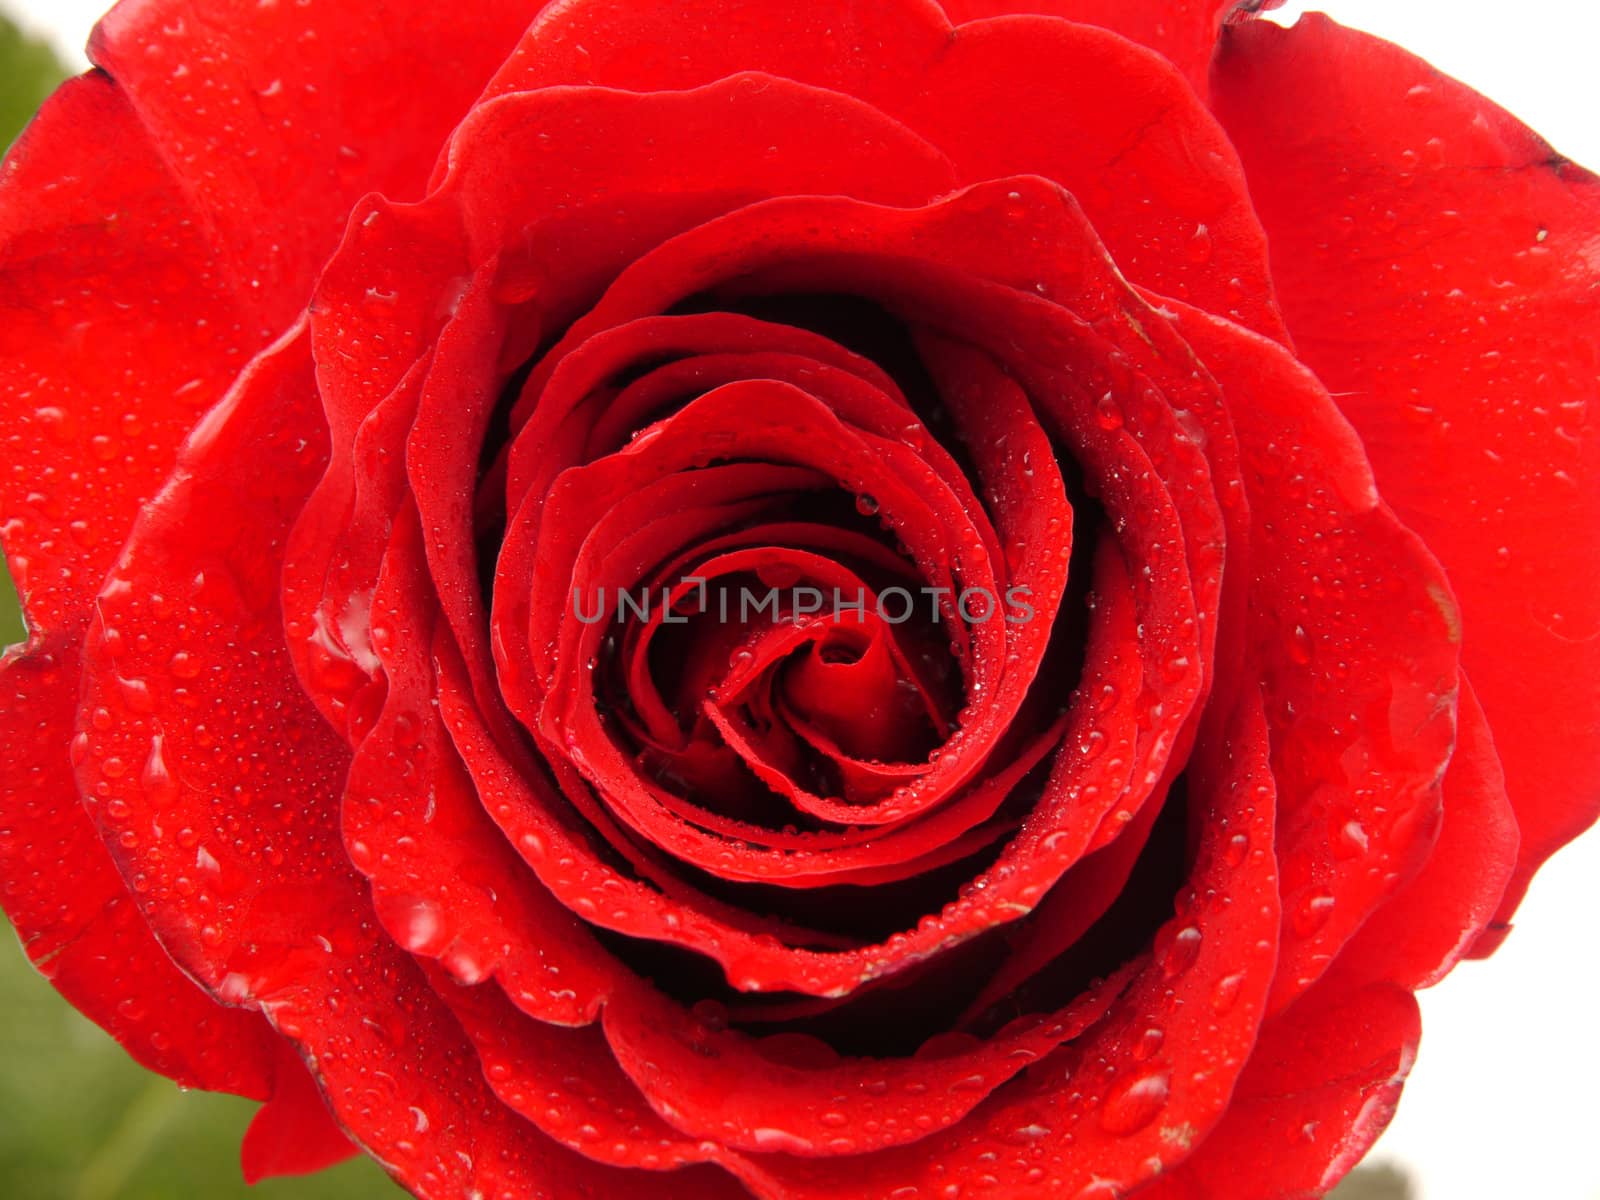 Rose on a white background by Enskanto